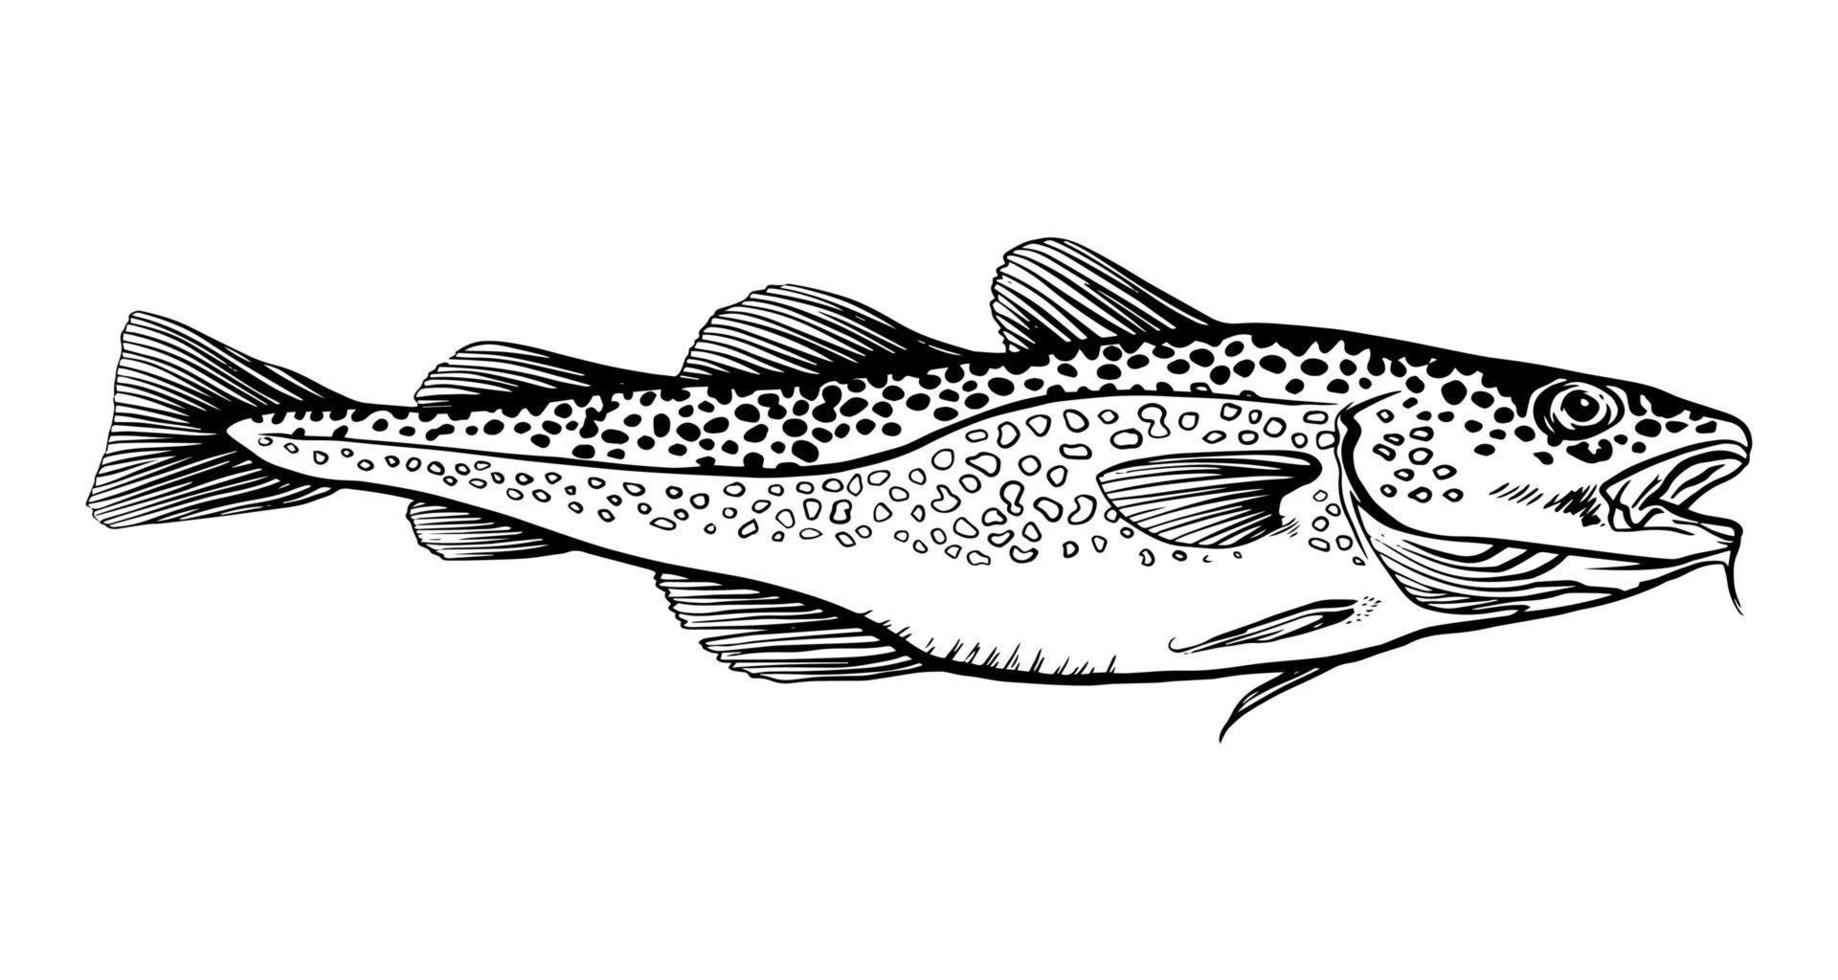 Ink Hand drawn vector illustration of cod fish, Gadus morhua, on white background